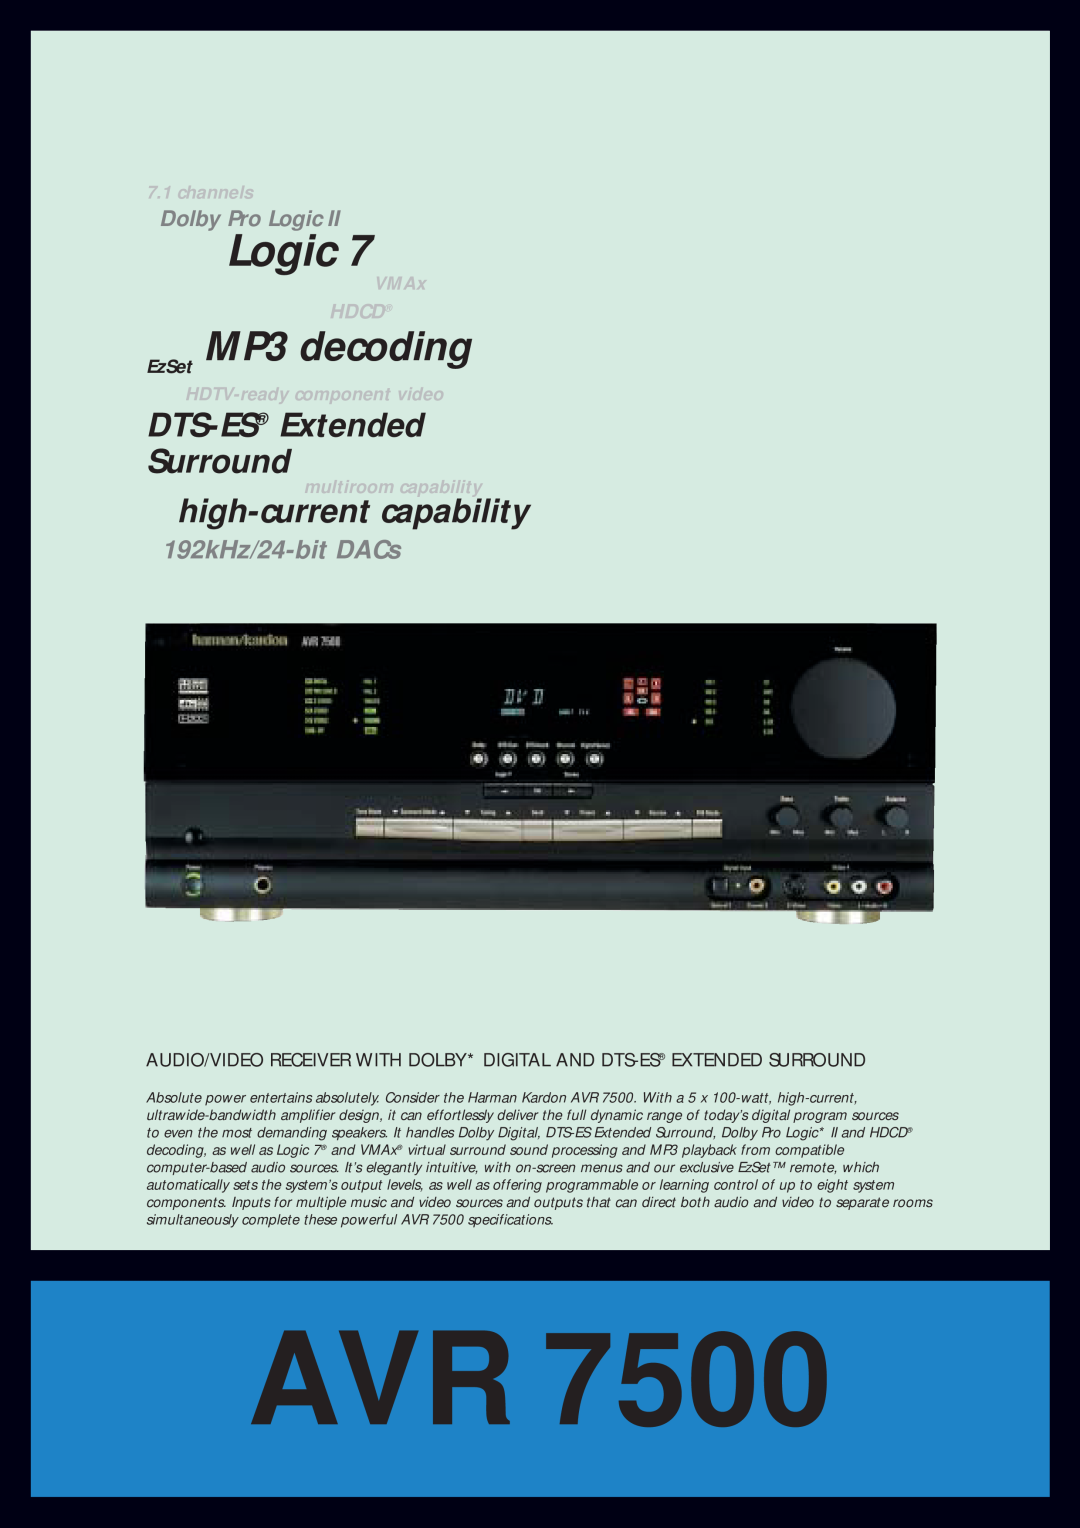 Dolby Laboratories AVR 7500 specifications Logic, MP3 decoding, DTS-ES Extended Surround, high-currentcapability, Hdcd 